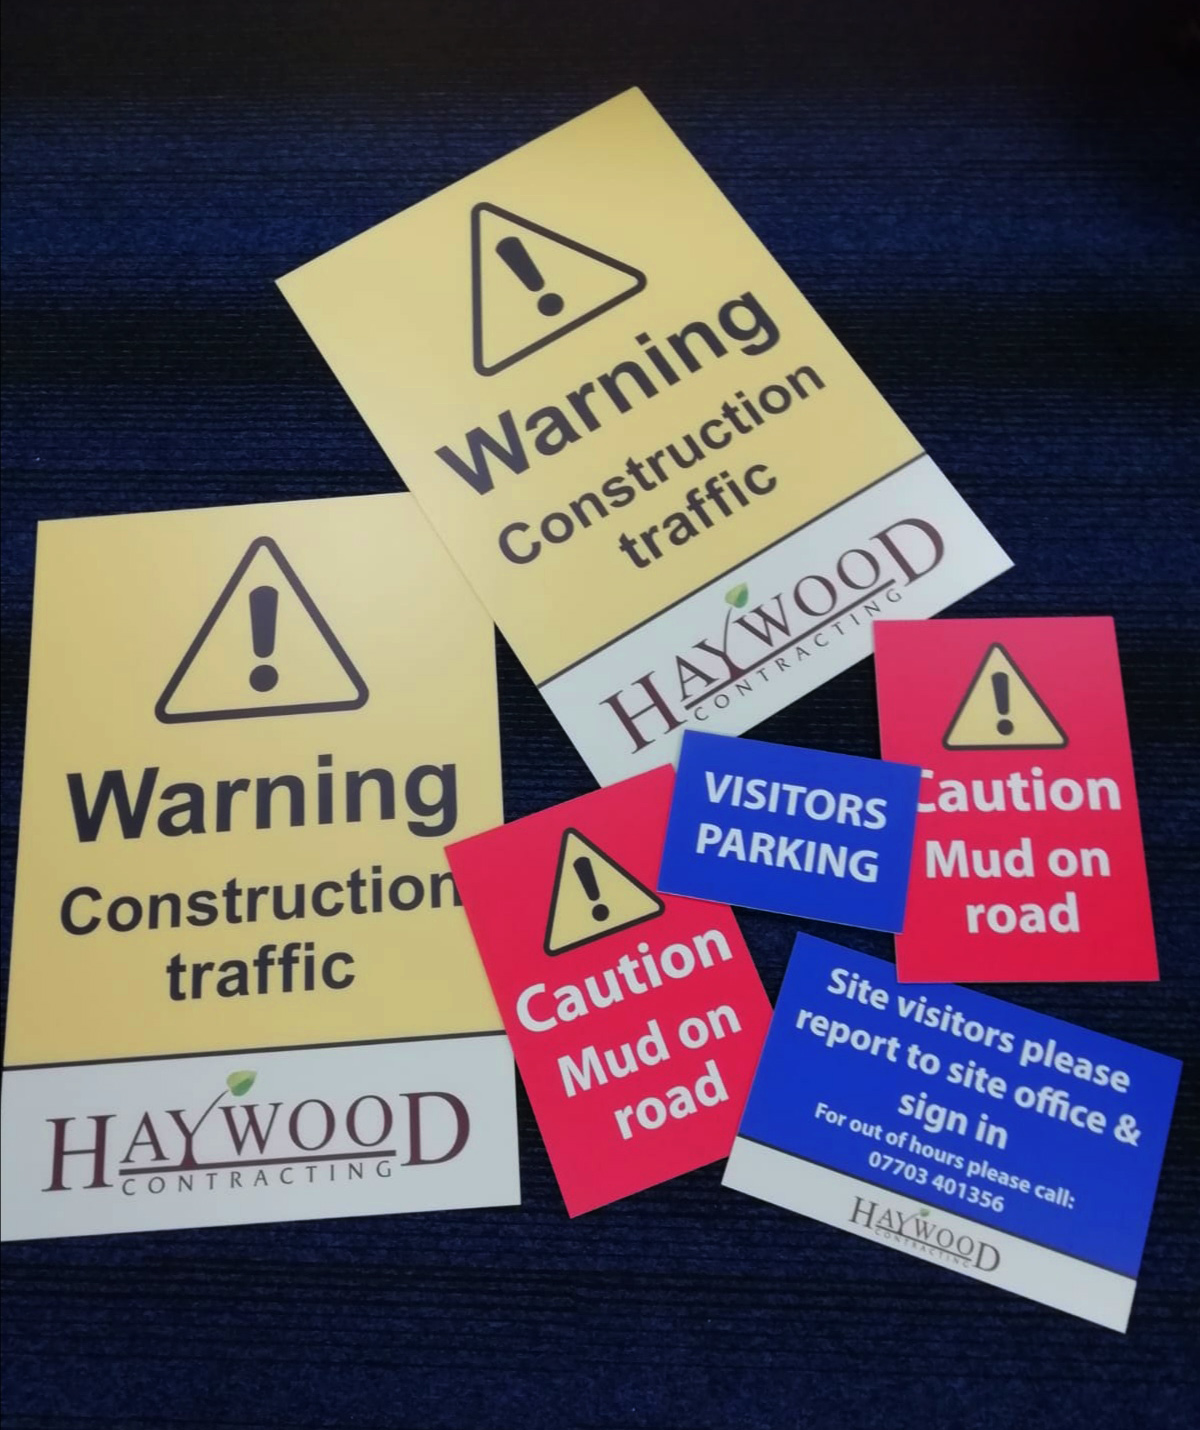 Haywood Contracting Safety Signage